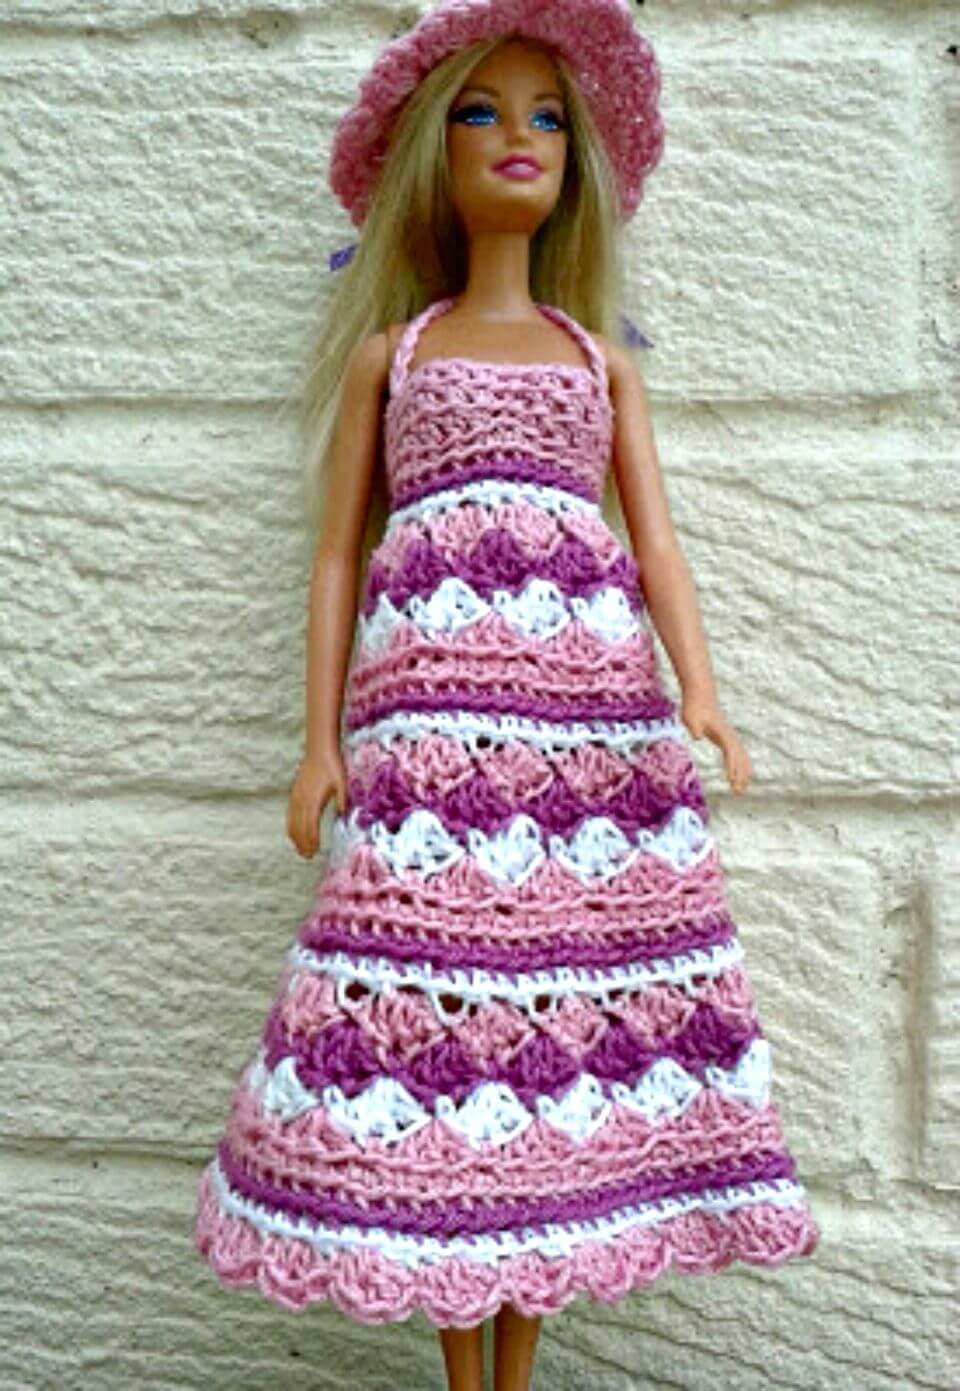 Crochet Doll Dress Patterns For Barbies 20 Free Crochet Barbie Clothes Pattern Diy Crafts